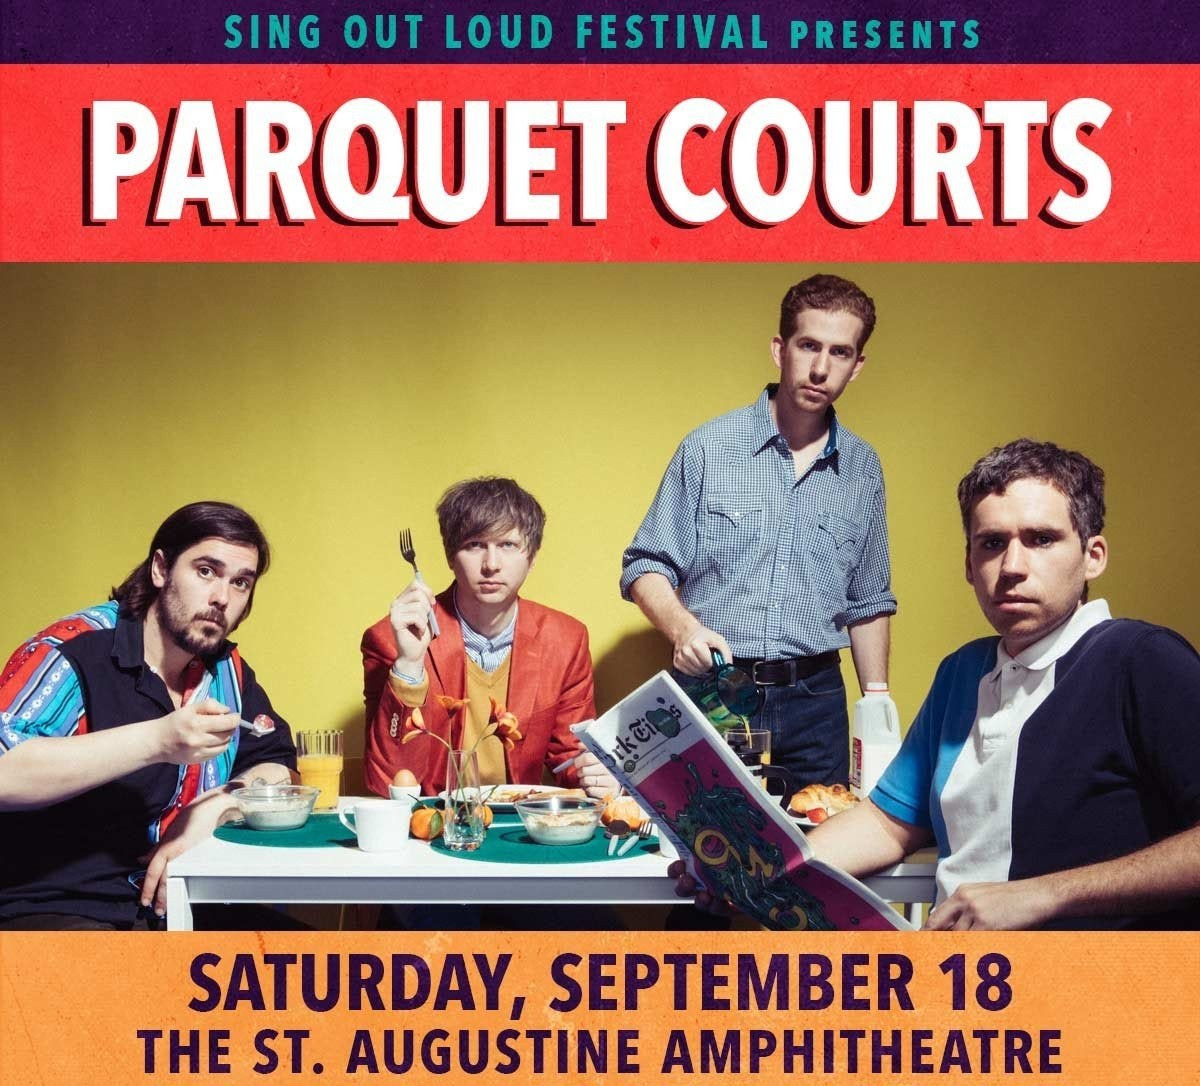 Parquet Courts sing out loud